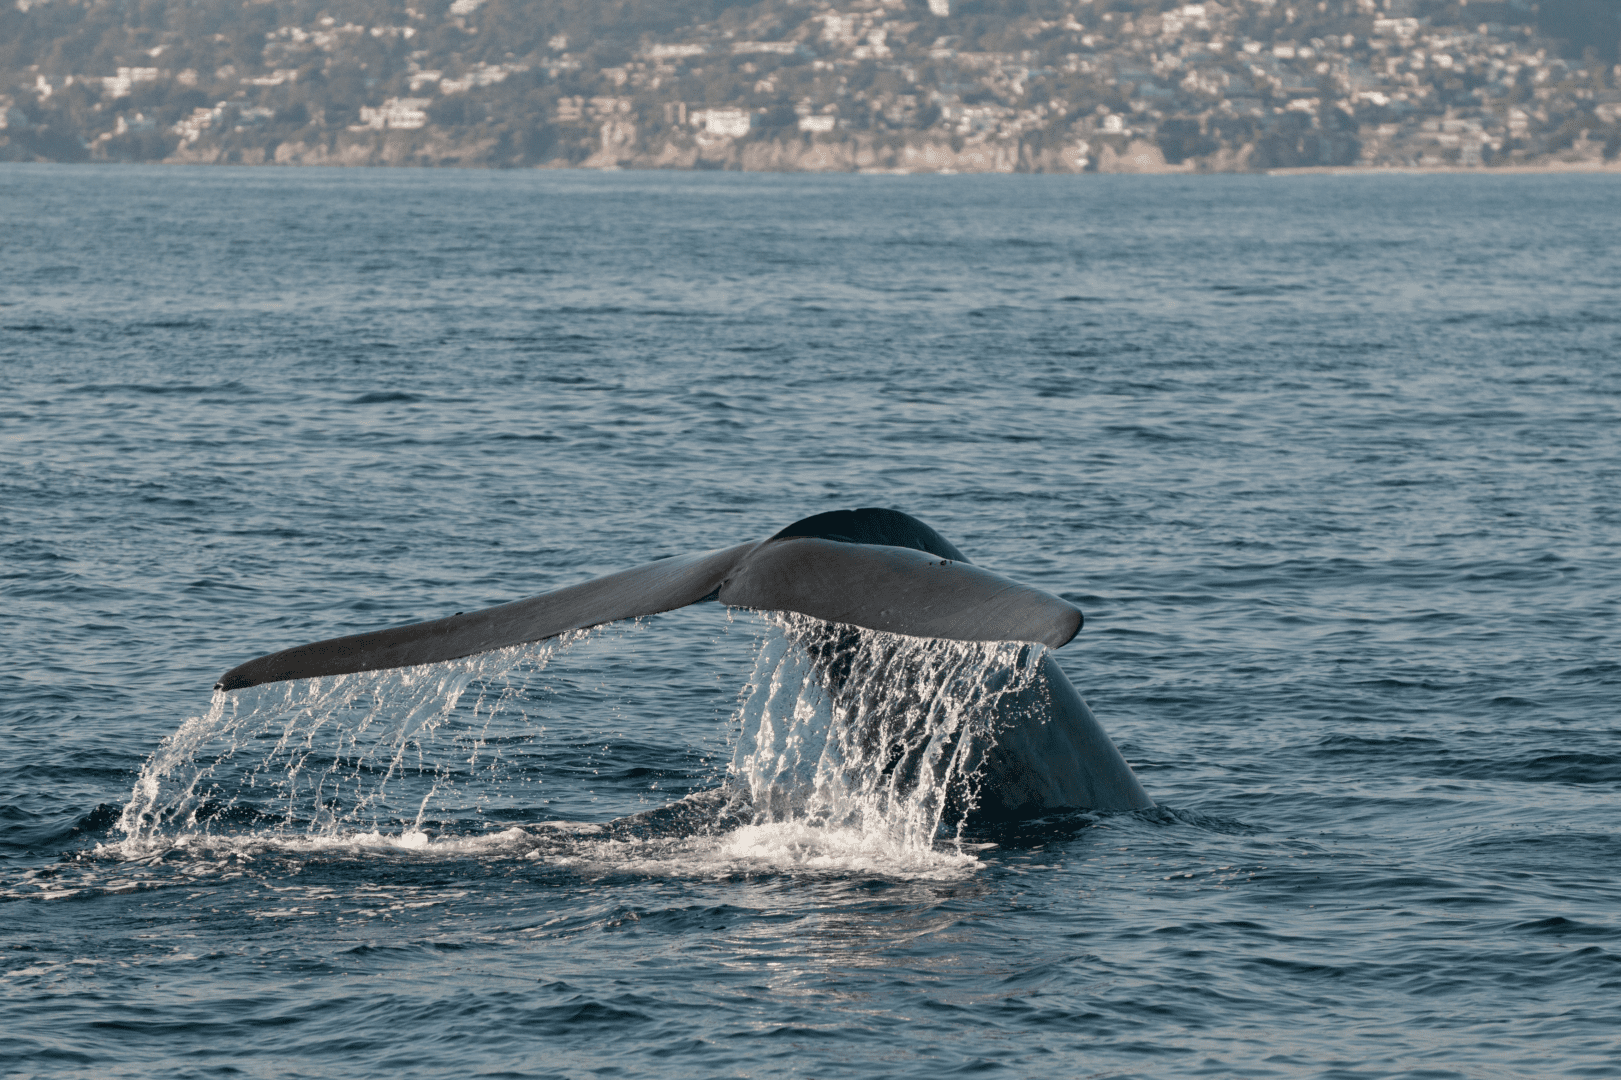 A whale is swimming in the ocean with its tail.